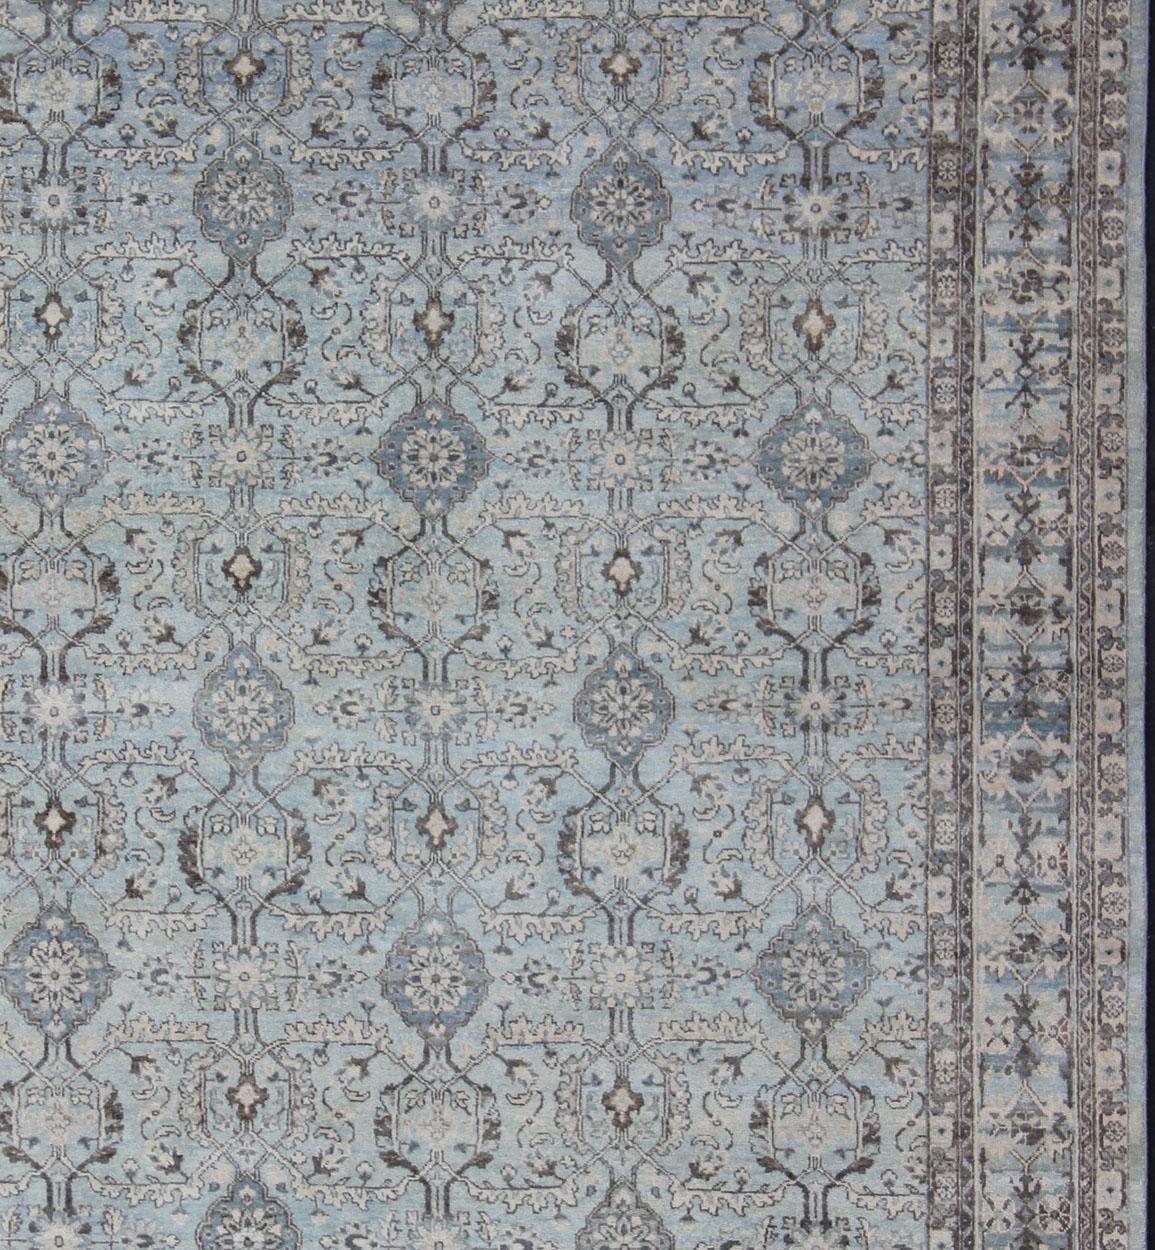 Measures: 8 x 10 
This marvelous Oushak features an all-over design flanked by a repeating pattern in the border. The entirety of the piece is rendered in gray, blue and brown tones, making it a versatile rug, well-suited for a variety of interiors